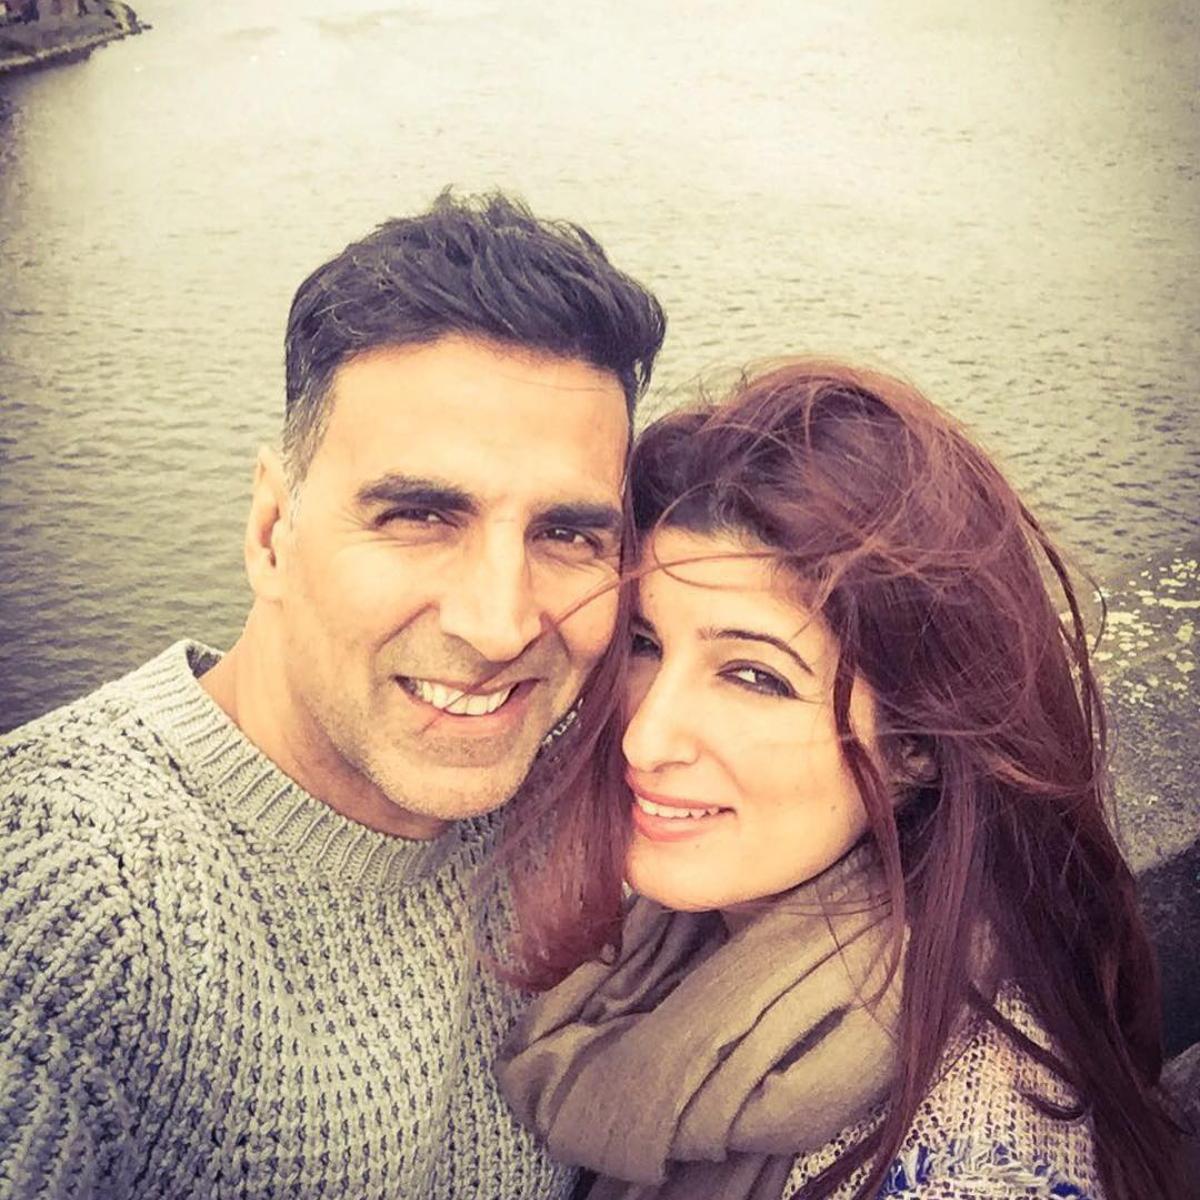 In the year 2001, Akshay Kumar and Twinkle Khanna tied the knot, creating a dynamic couple that Bollywood would always remember.